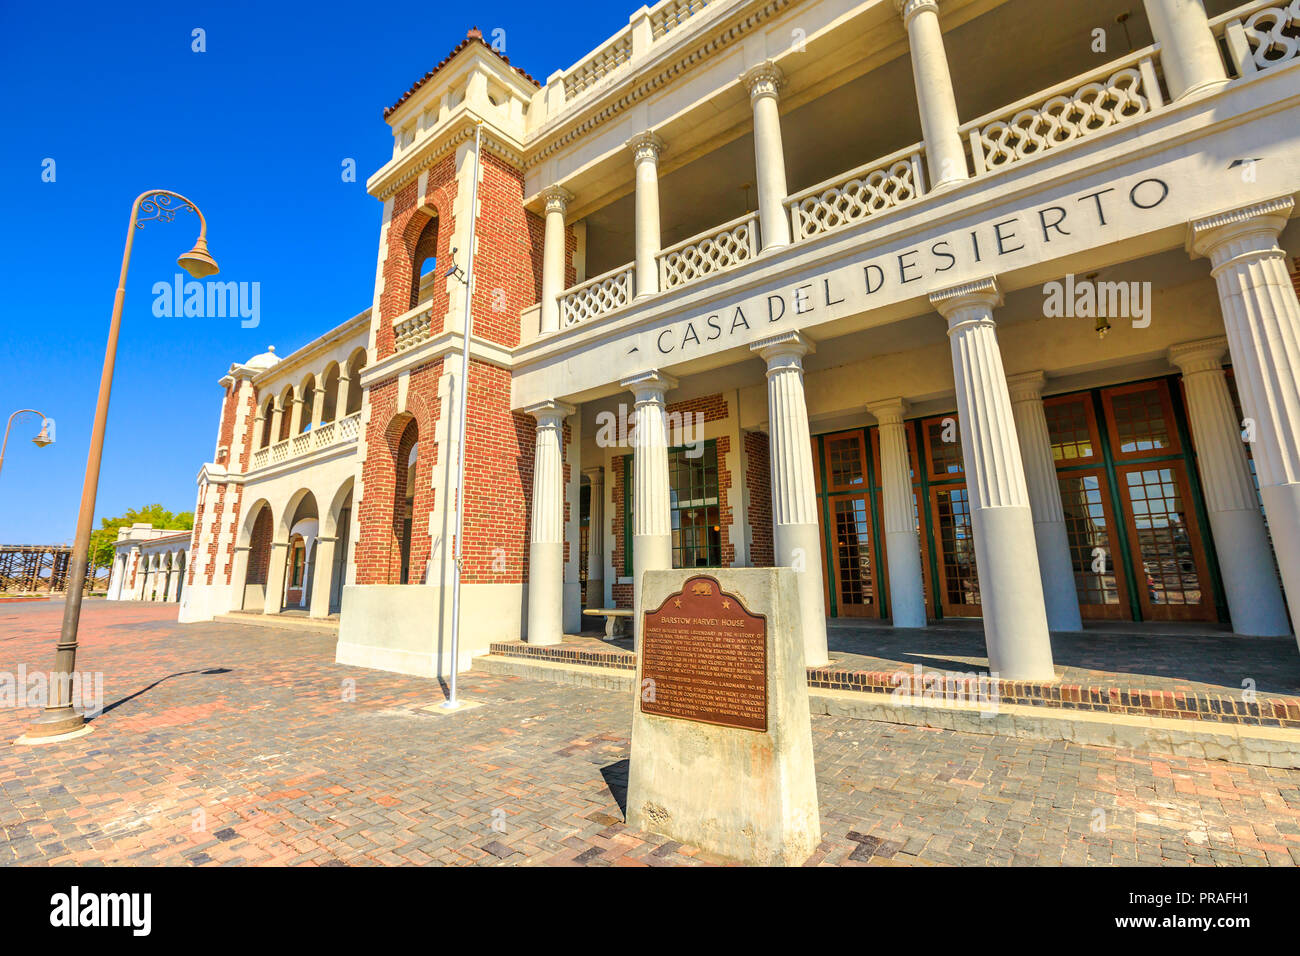 Barstow, California, USA - August 15, 2018: Barstow Harvey House or Railroad Depot, is a historic building home to: Amtrak station, government building offices, Chamber of Commerce, Visitor Center. Stock Photo